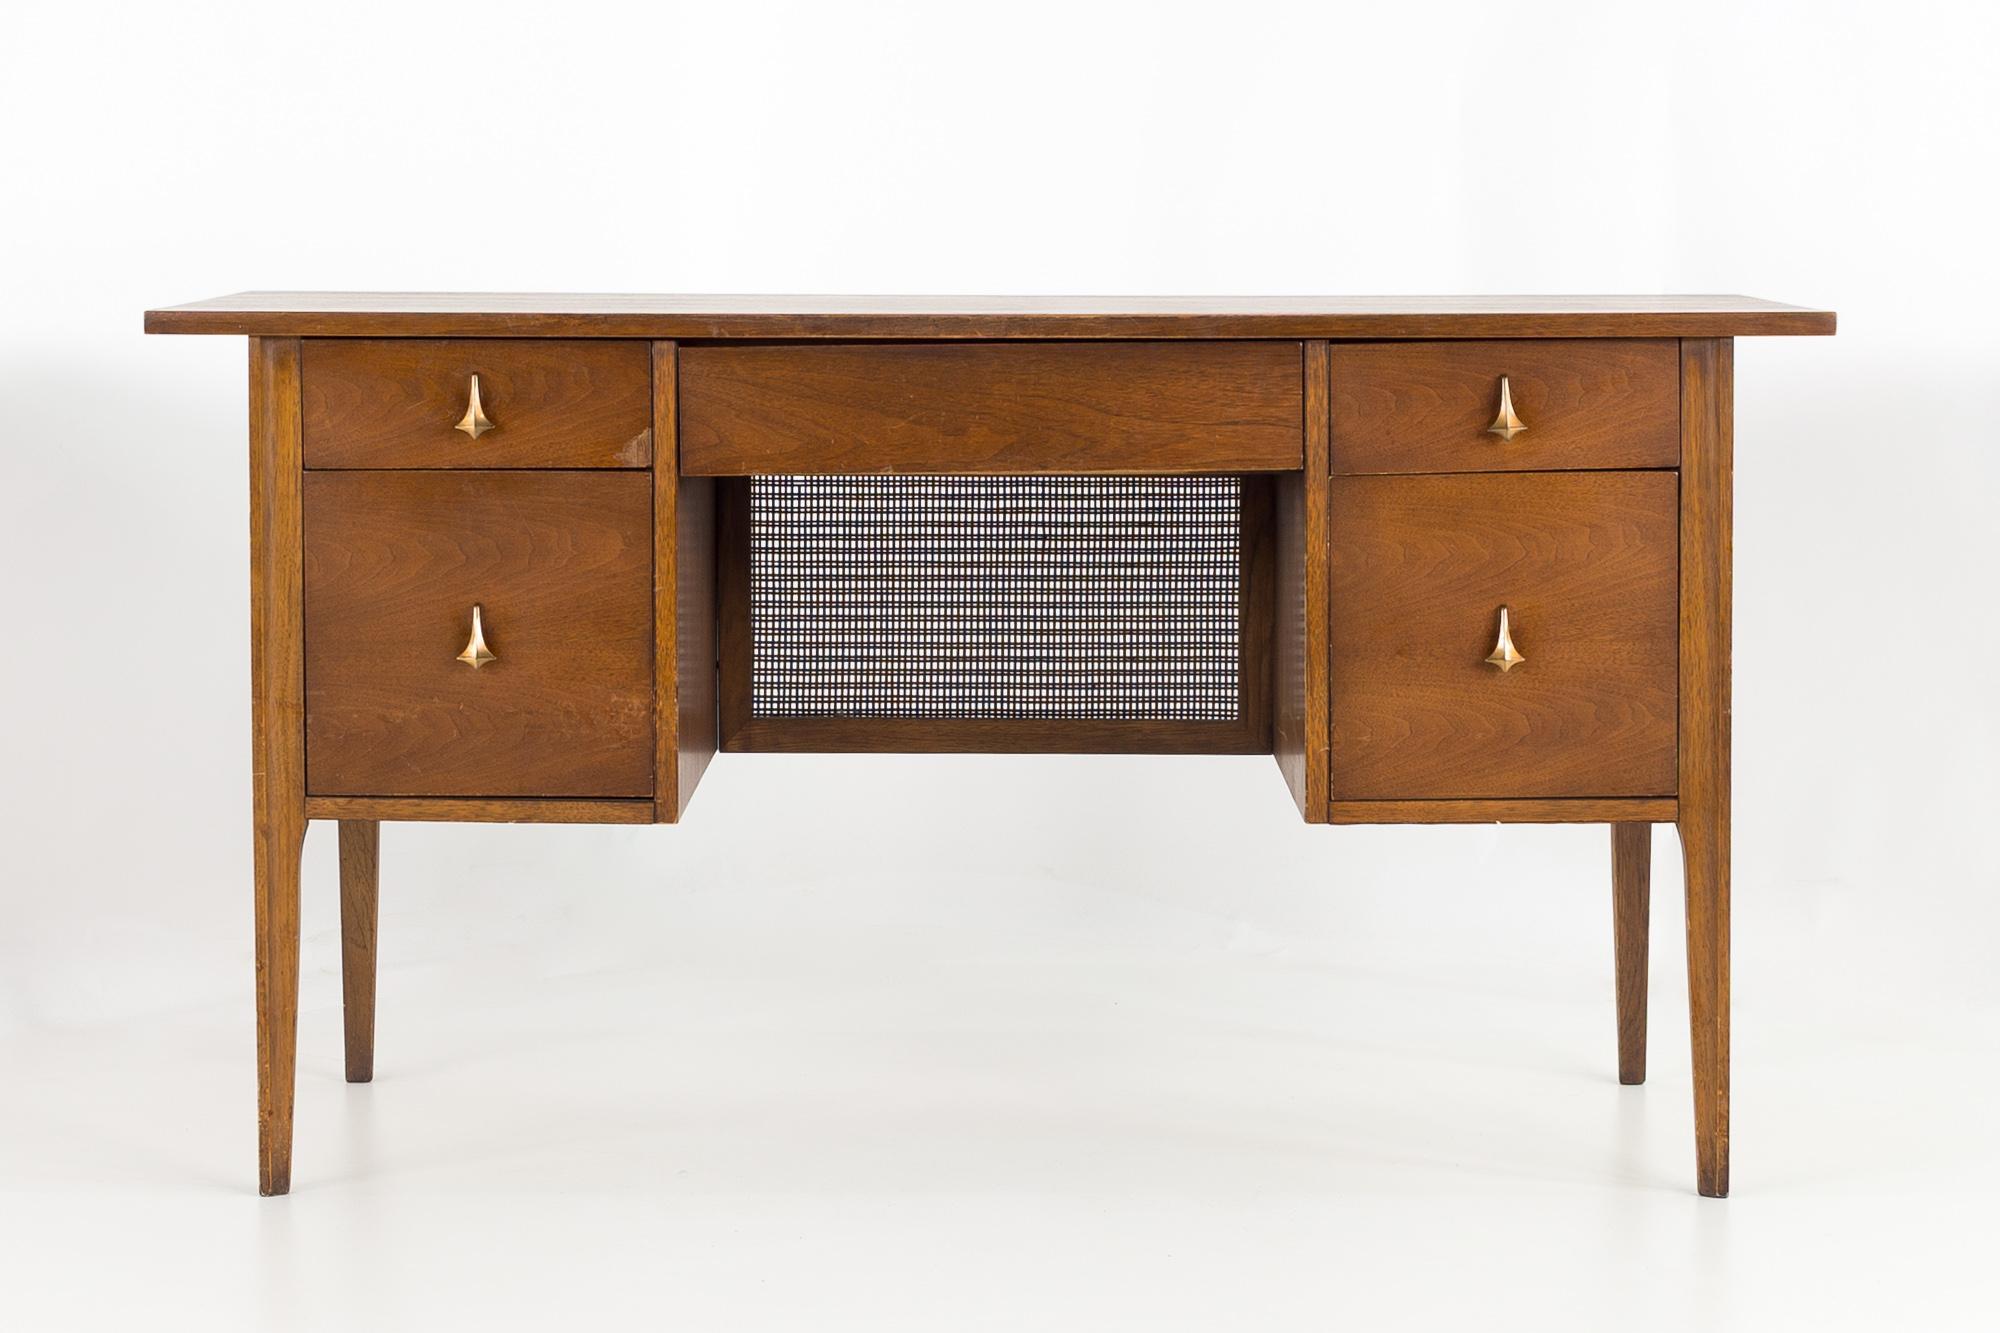 Broyhill Brasilia mid century walnut executive desk
Desk measures 56 wide x 23.25 deep x 30 inches high; Knee hole measures 21 wide x 22 deep x 24.5 inches high

All pieces of furniture can be had in what we call restored vintage condition. That